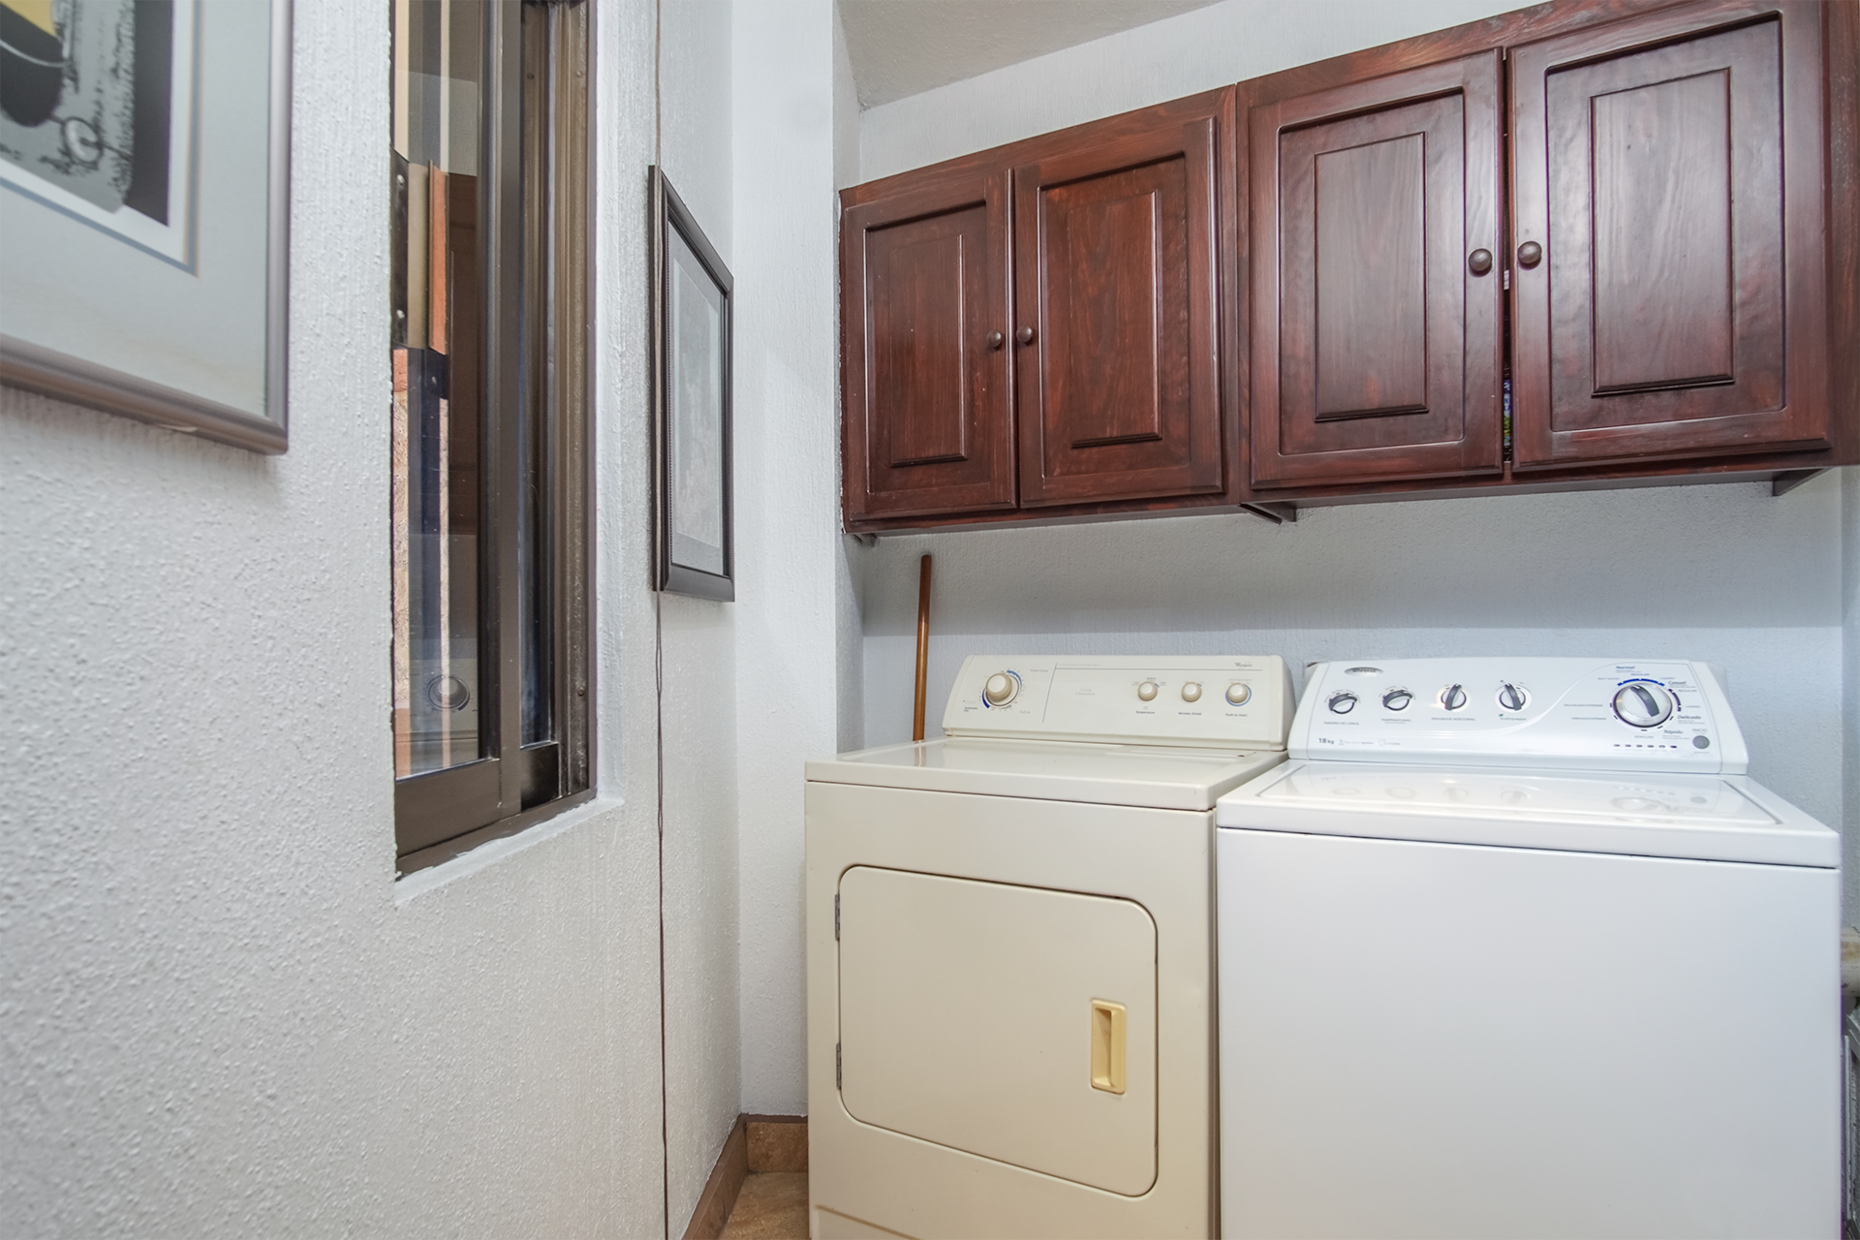 utility room with washer dryer